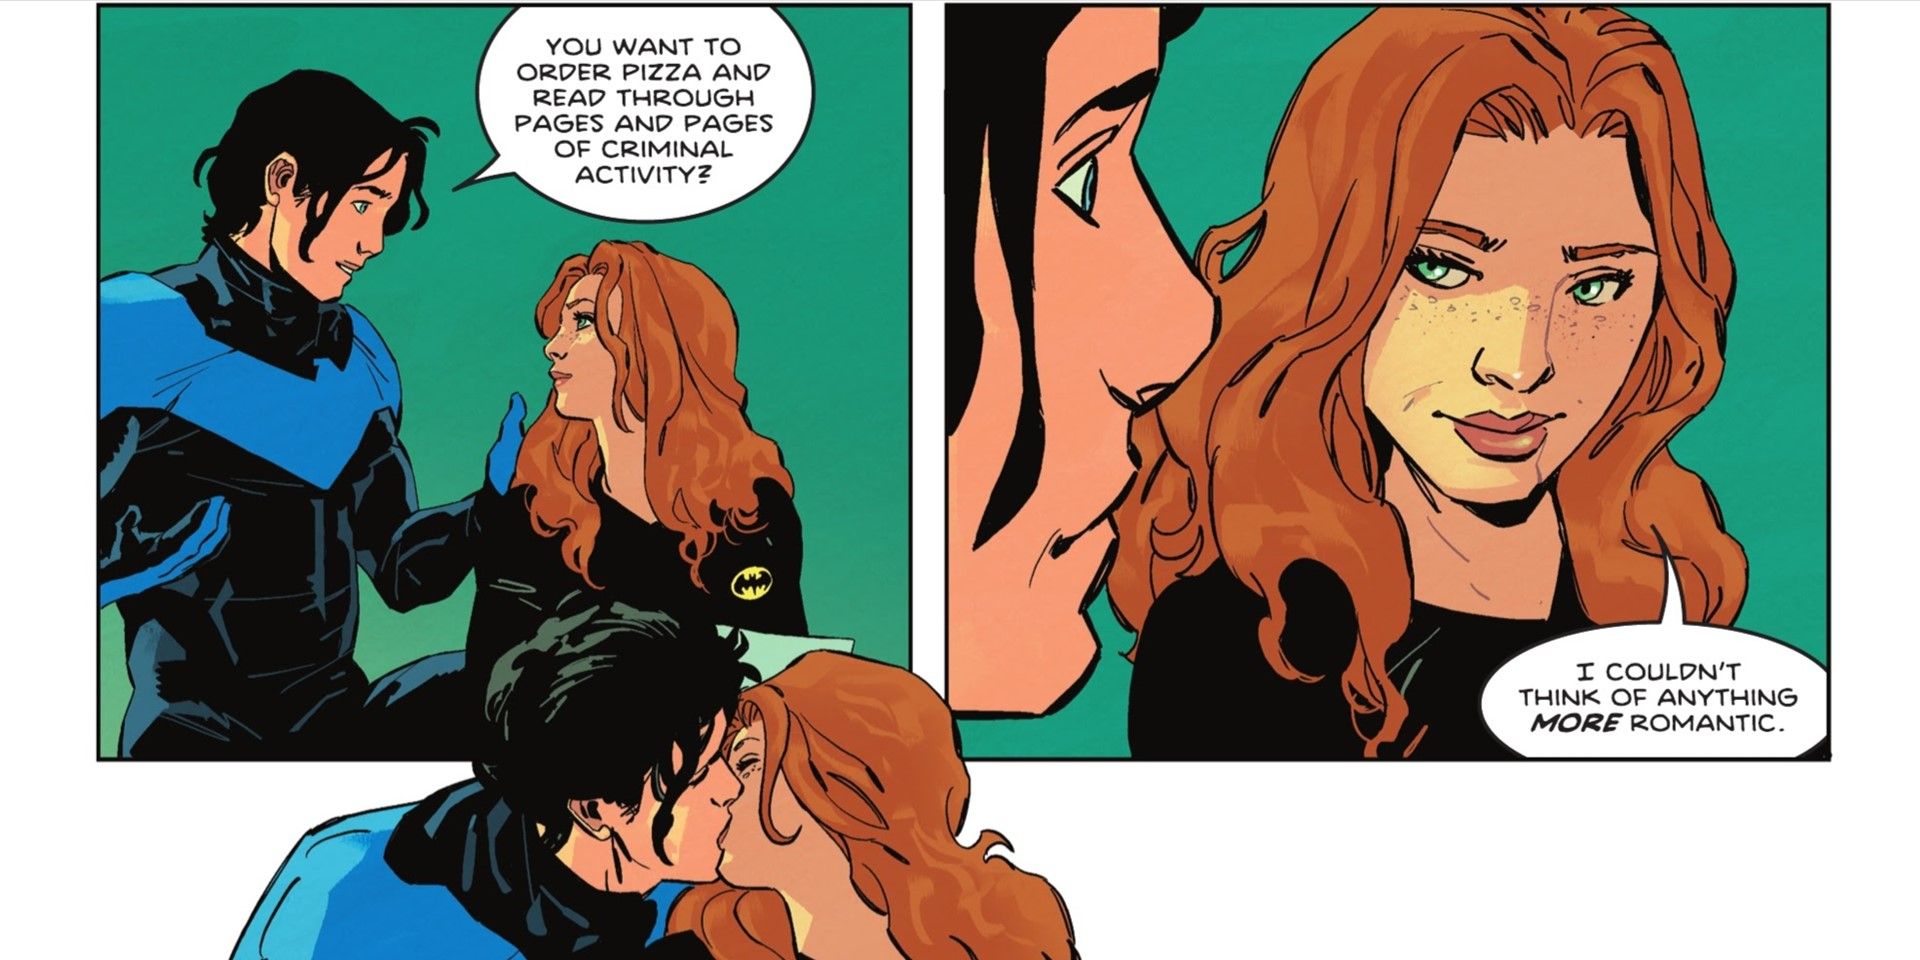 Dick Grayson and Barbara Gordon have a date night in DC Comics